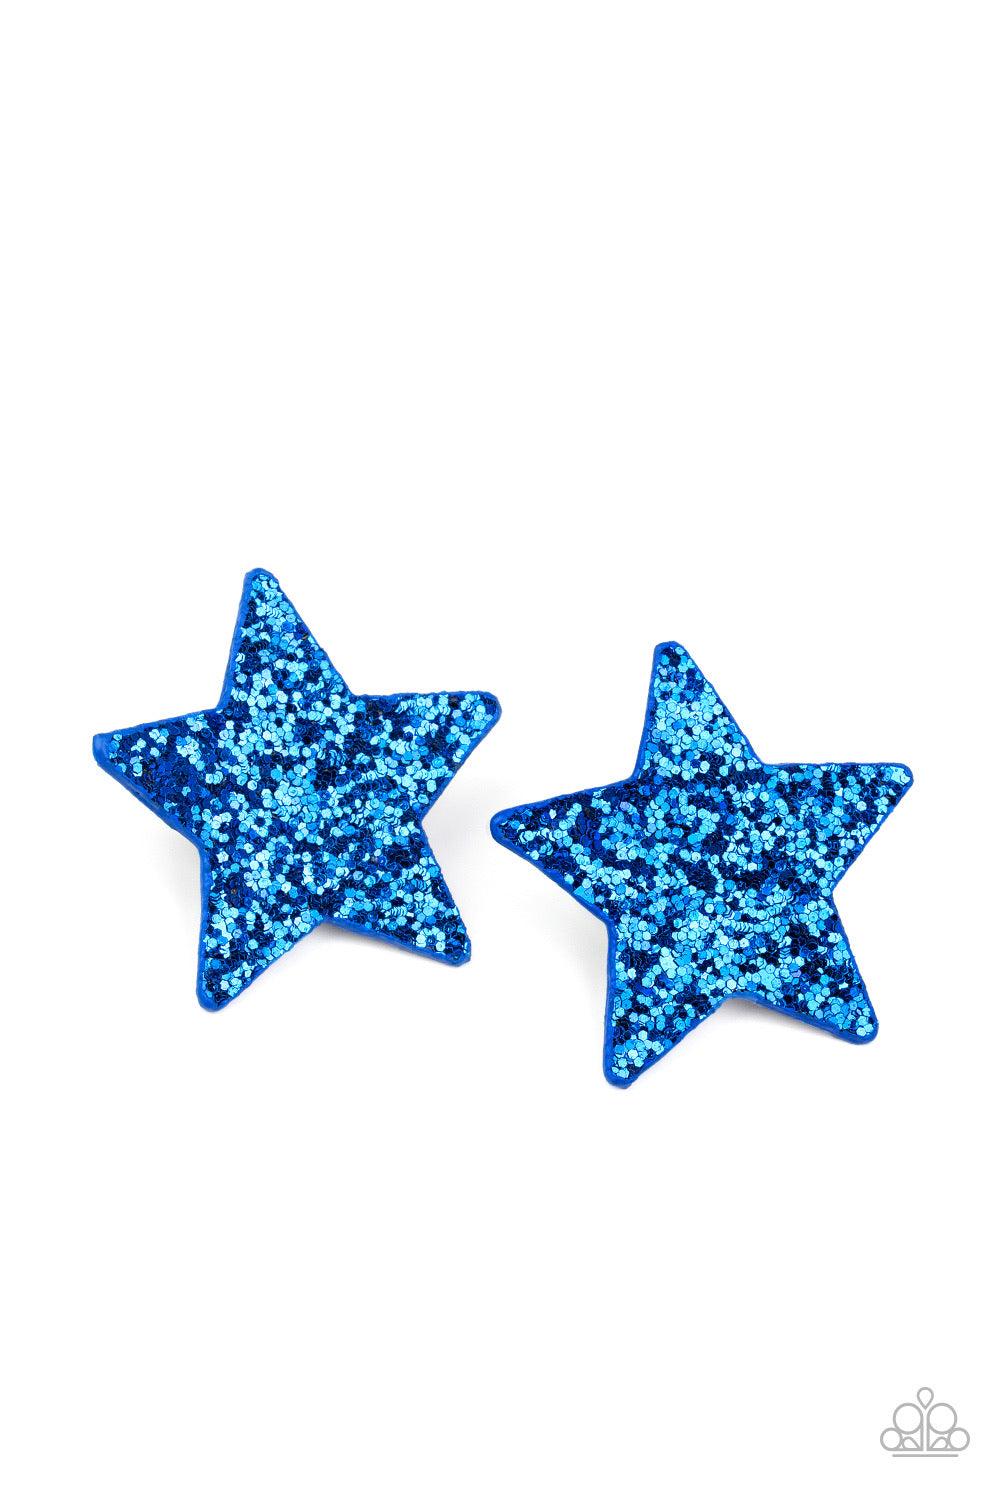 Paparazzi Accessories Star-Spangled Superstar - Blue Sprinkled in glittery blue sequins, a sparkling pair of stars are attached to clips on the back for a patriotic inspired fashion. Features standard snap clips. Hair Accessories